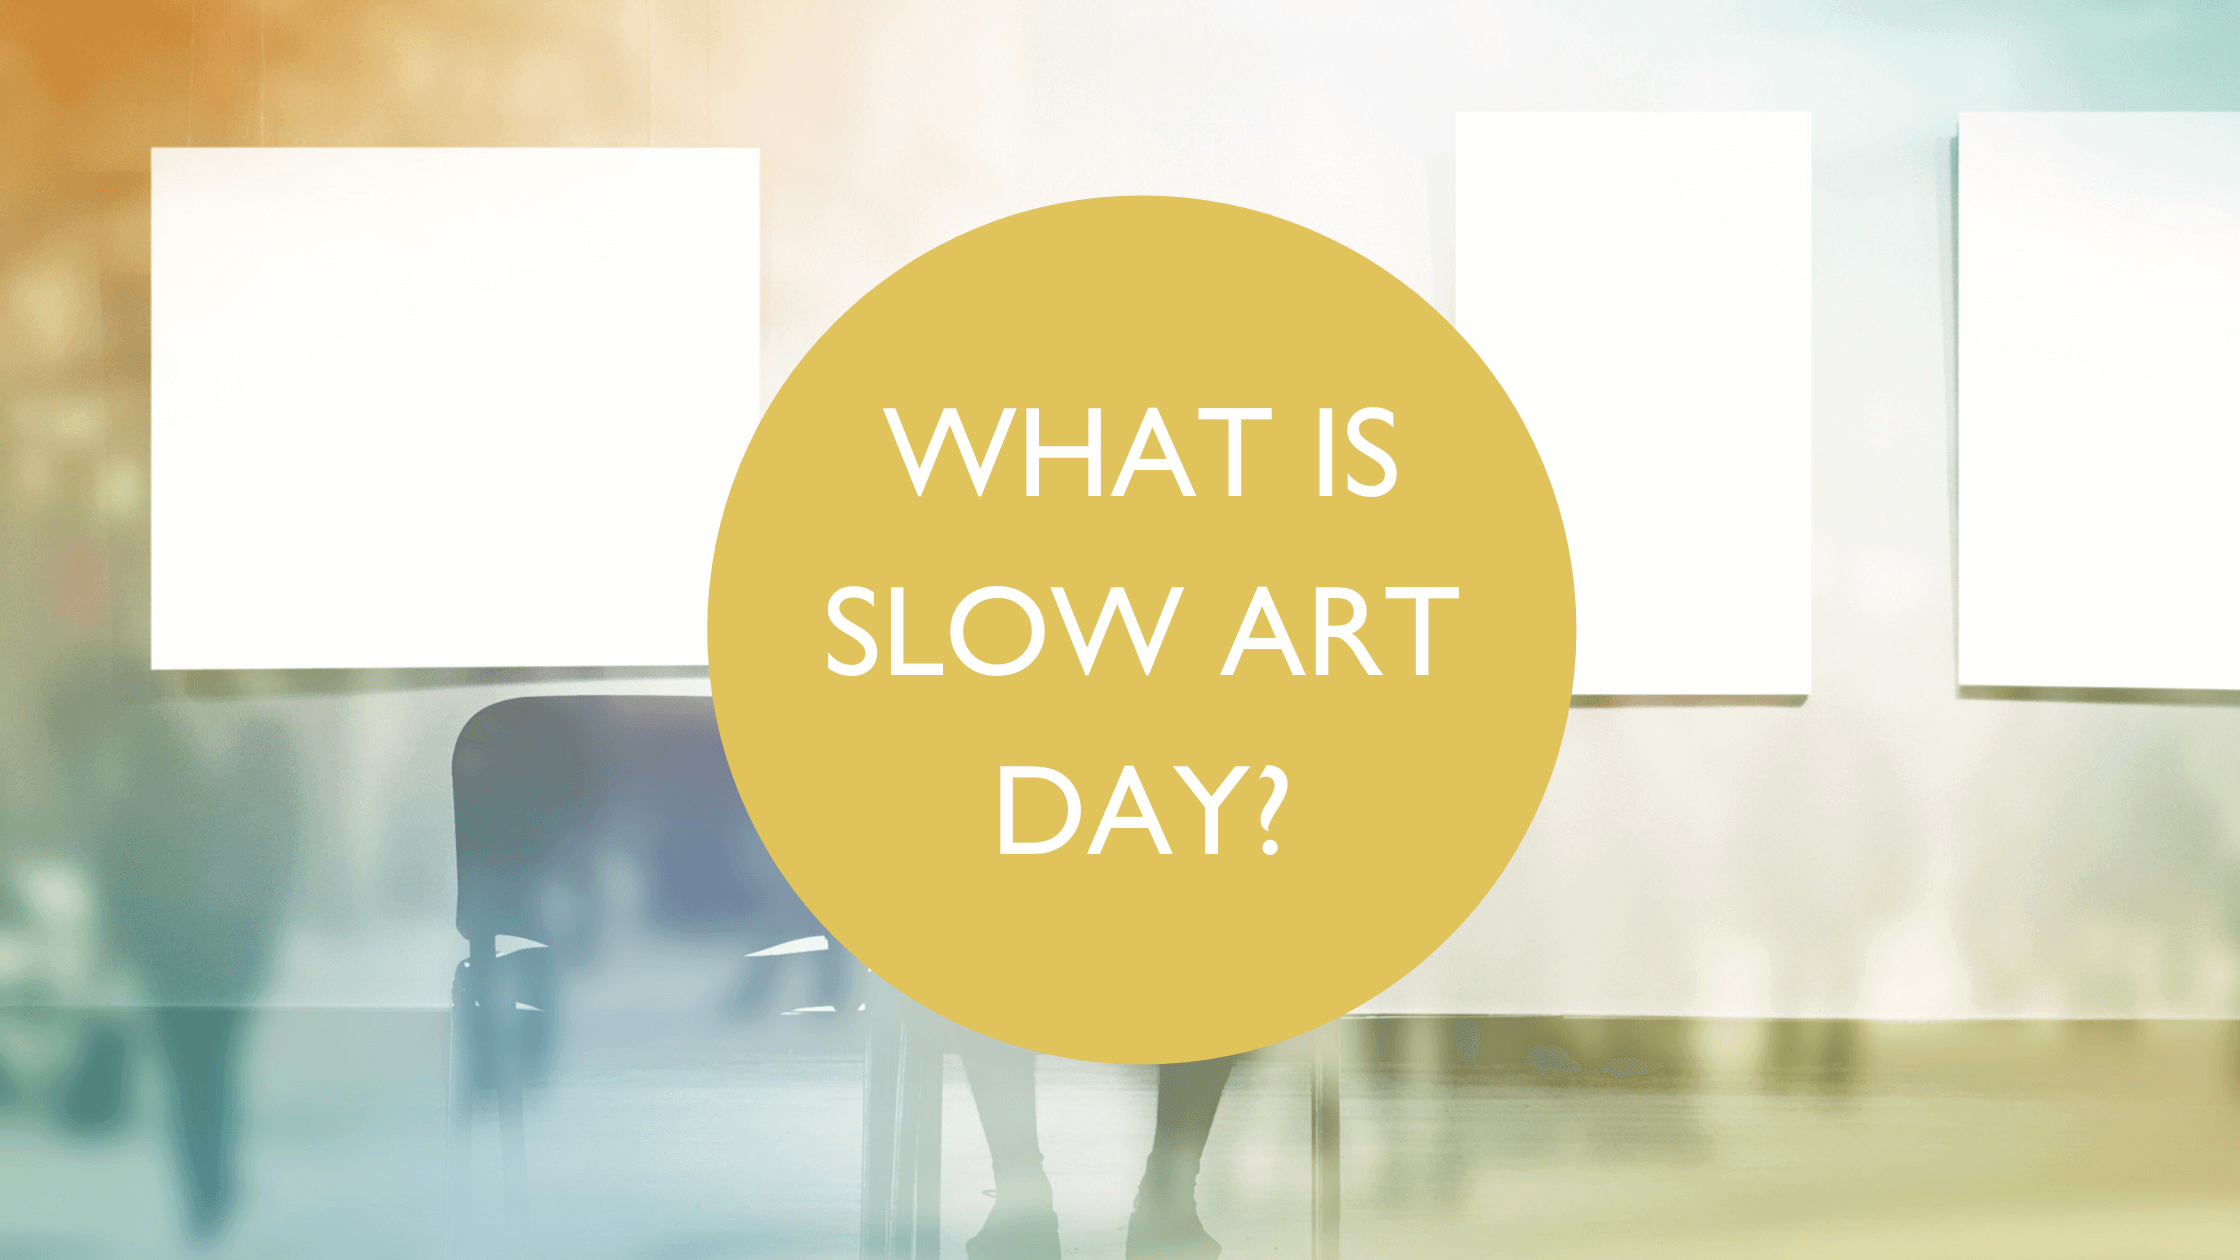 what is slow art day?